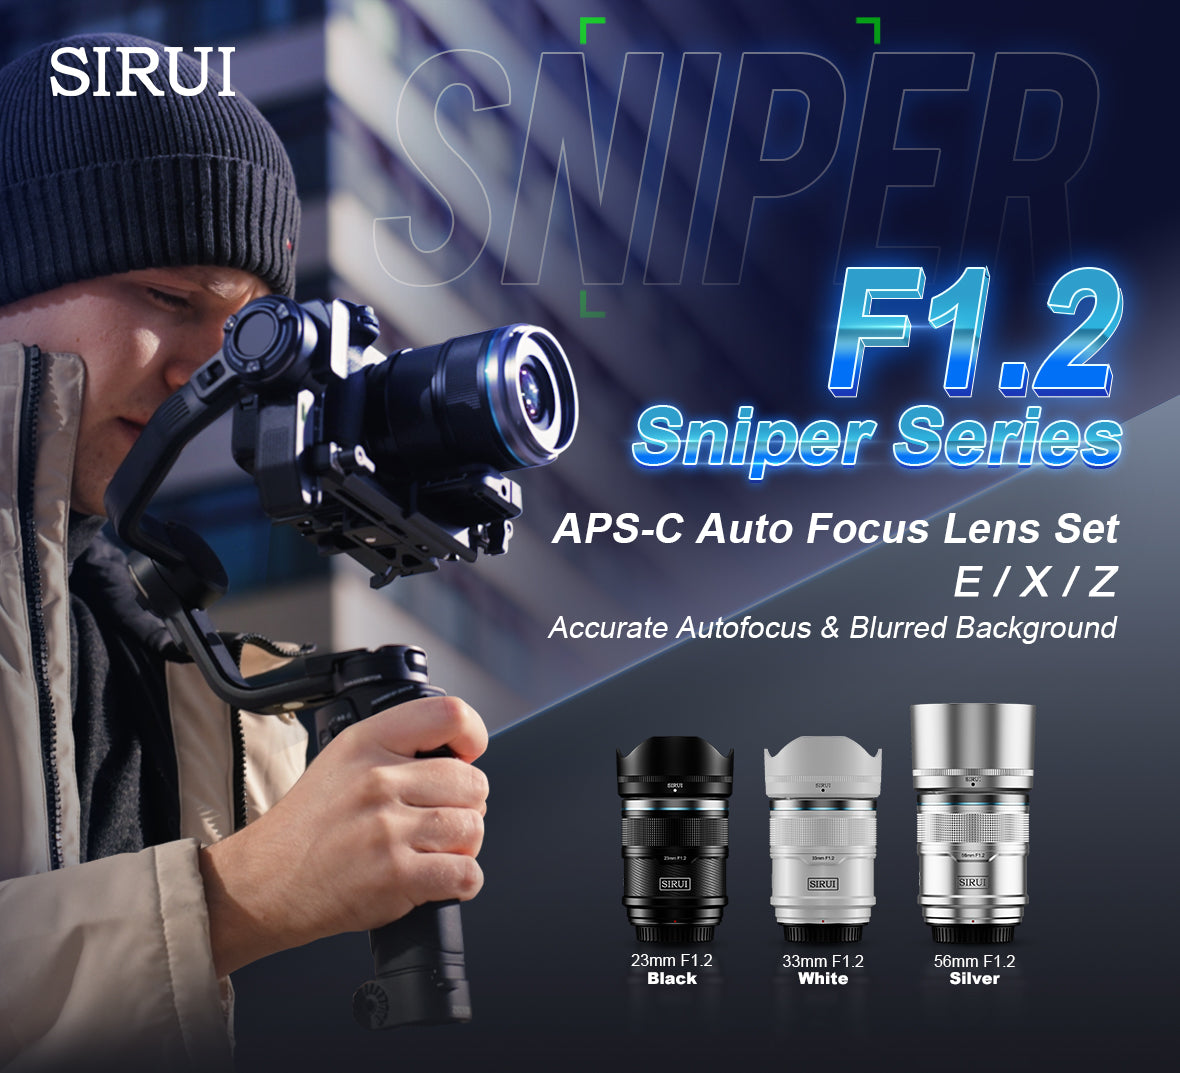 This sniper series APS-C f1.2 autofocus lens Set includes 23mm, 33mm and 56mm focal length lenses. E/X/Z mounts are provided（Compatible with Nikon, Sony, Fujifilm cameras.） and there are three optional colors - black, white and silver.